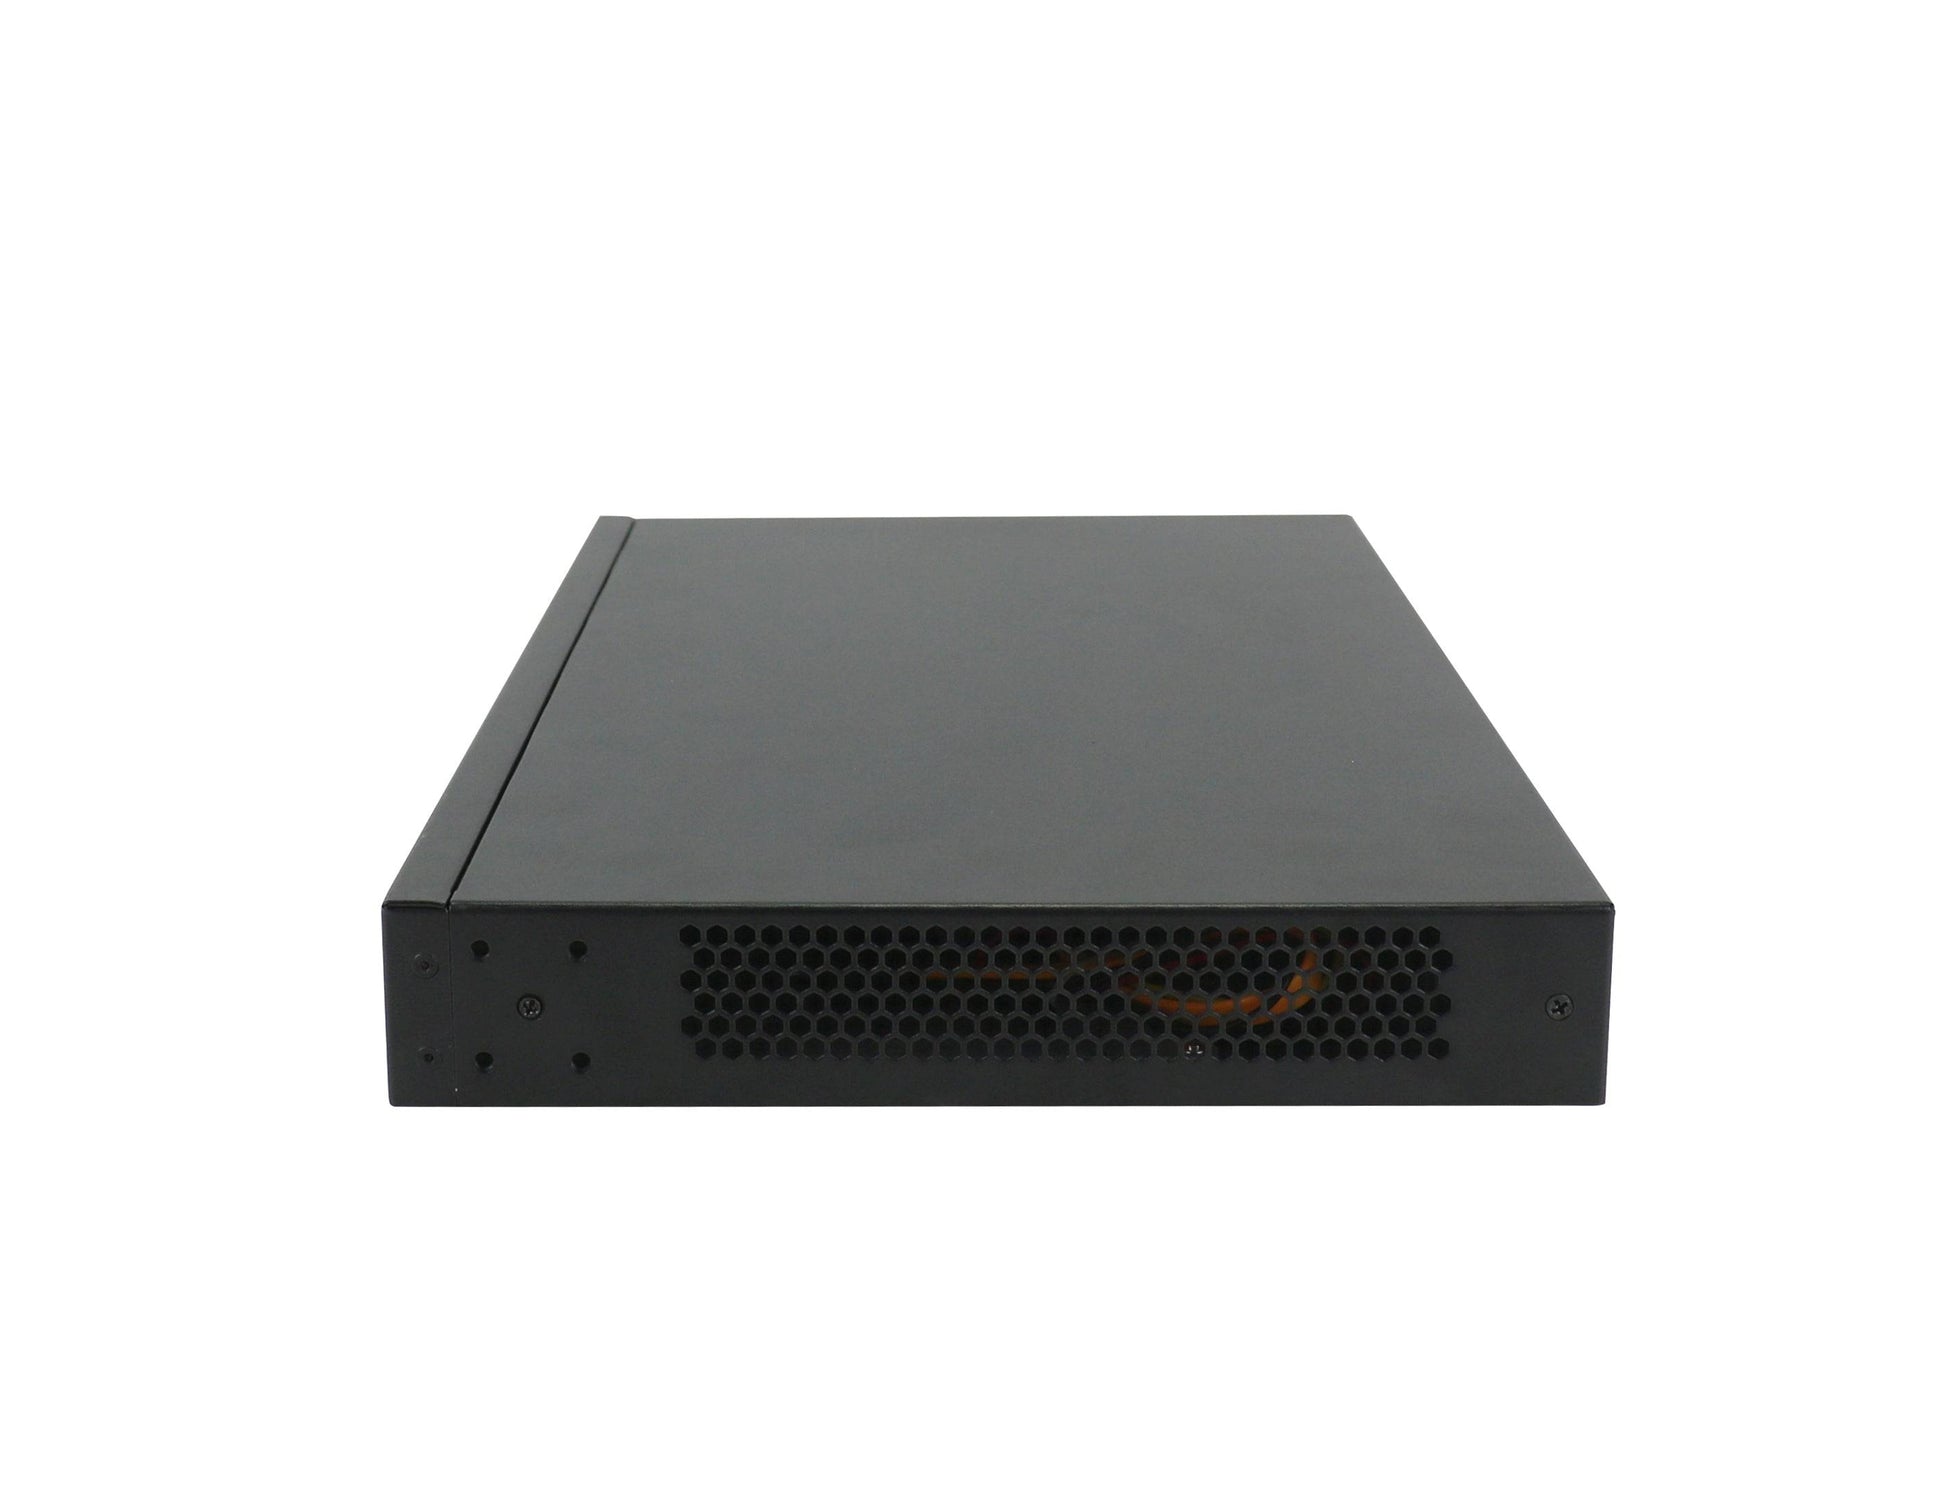 SecPoint Penetrator S9 - 8 IP Concurrent Scan License Vuln Scanning Appliance (1 Year) - SecPoint